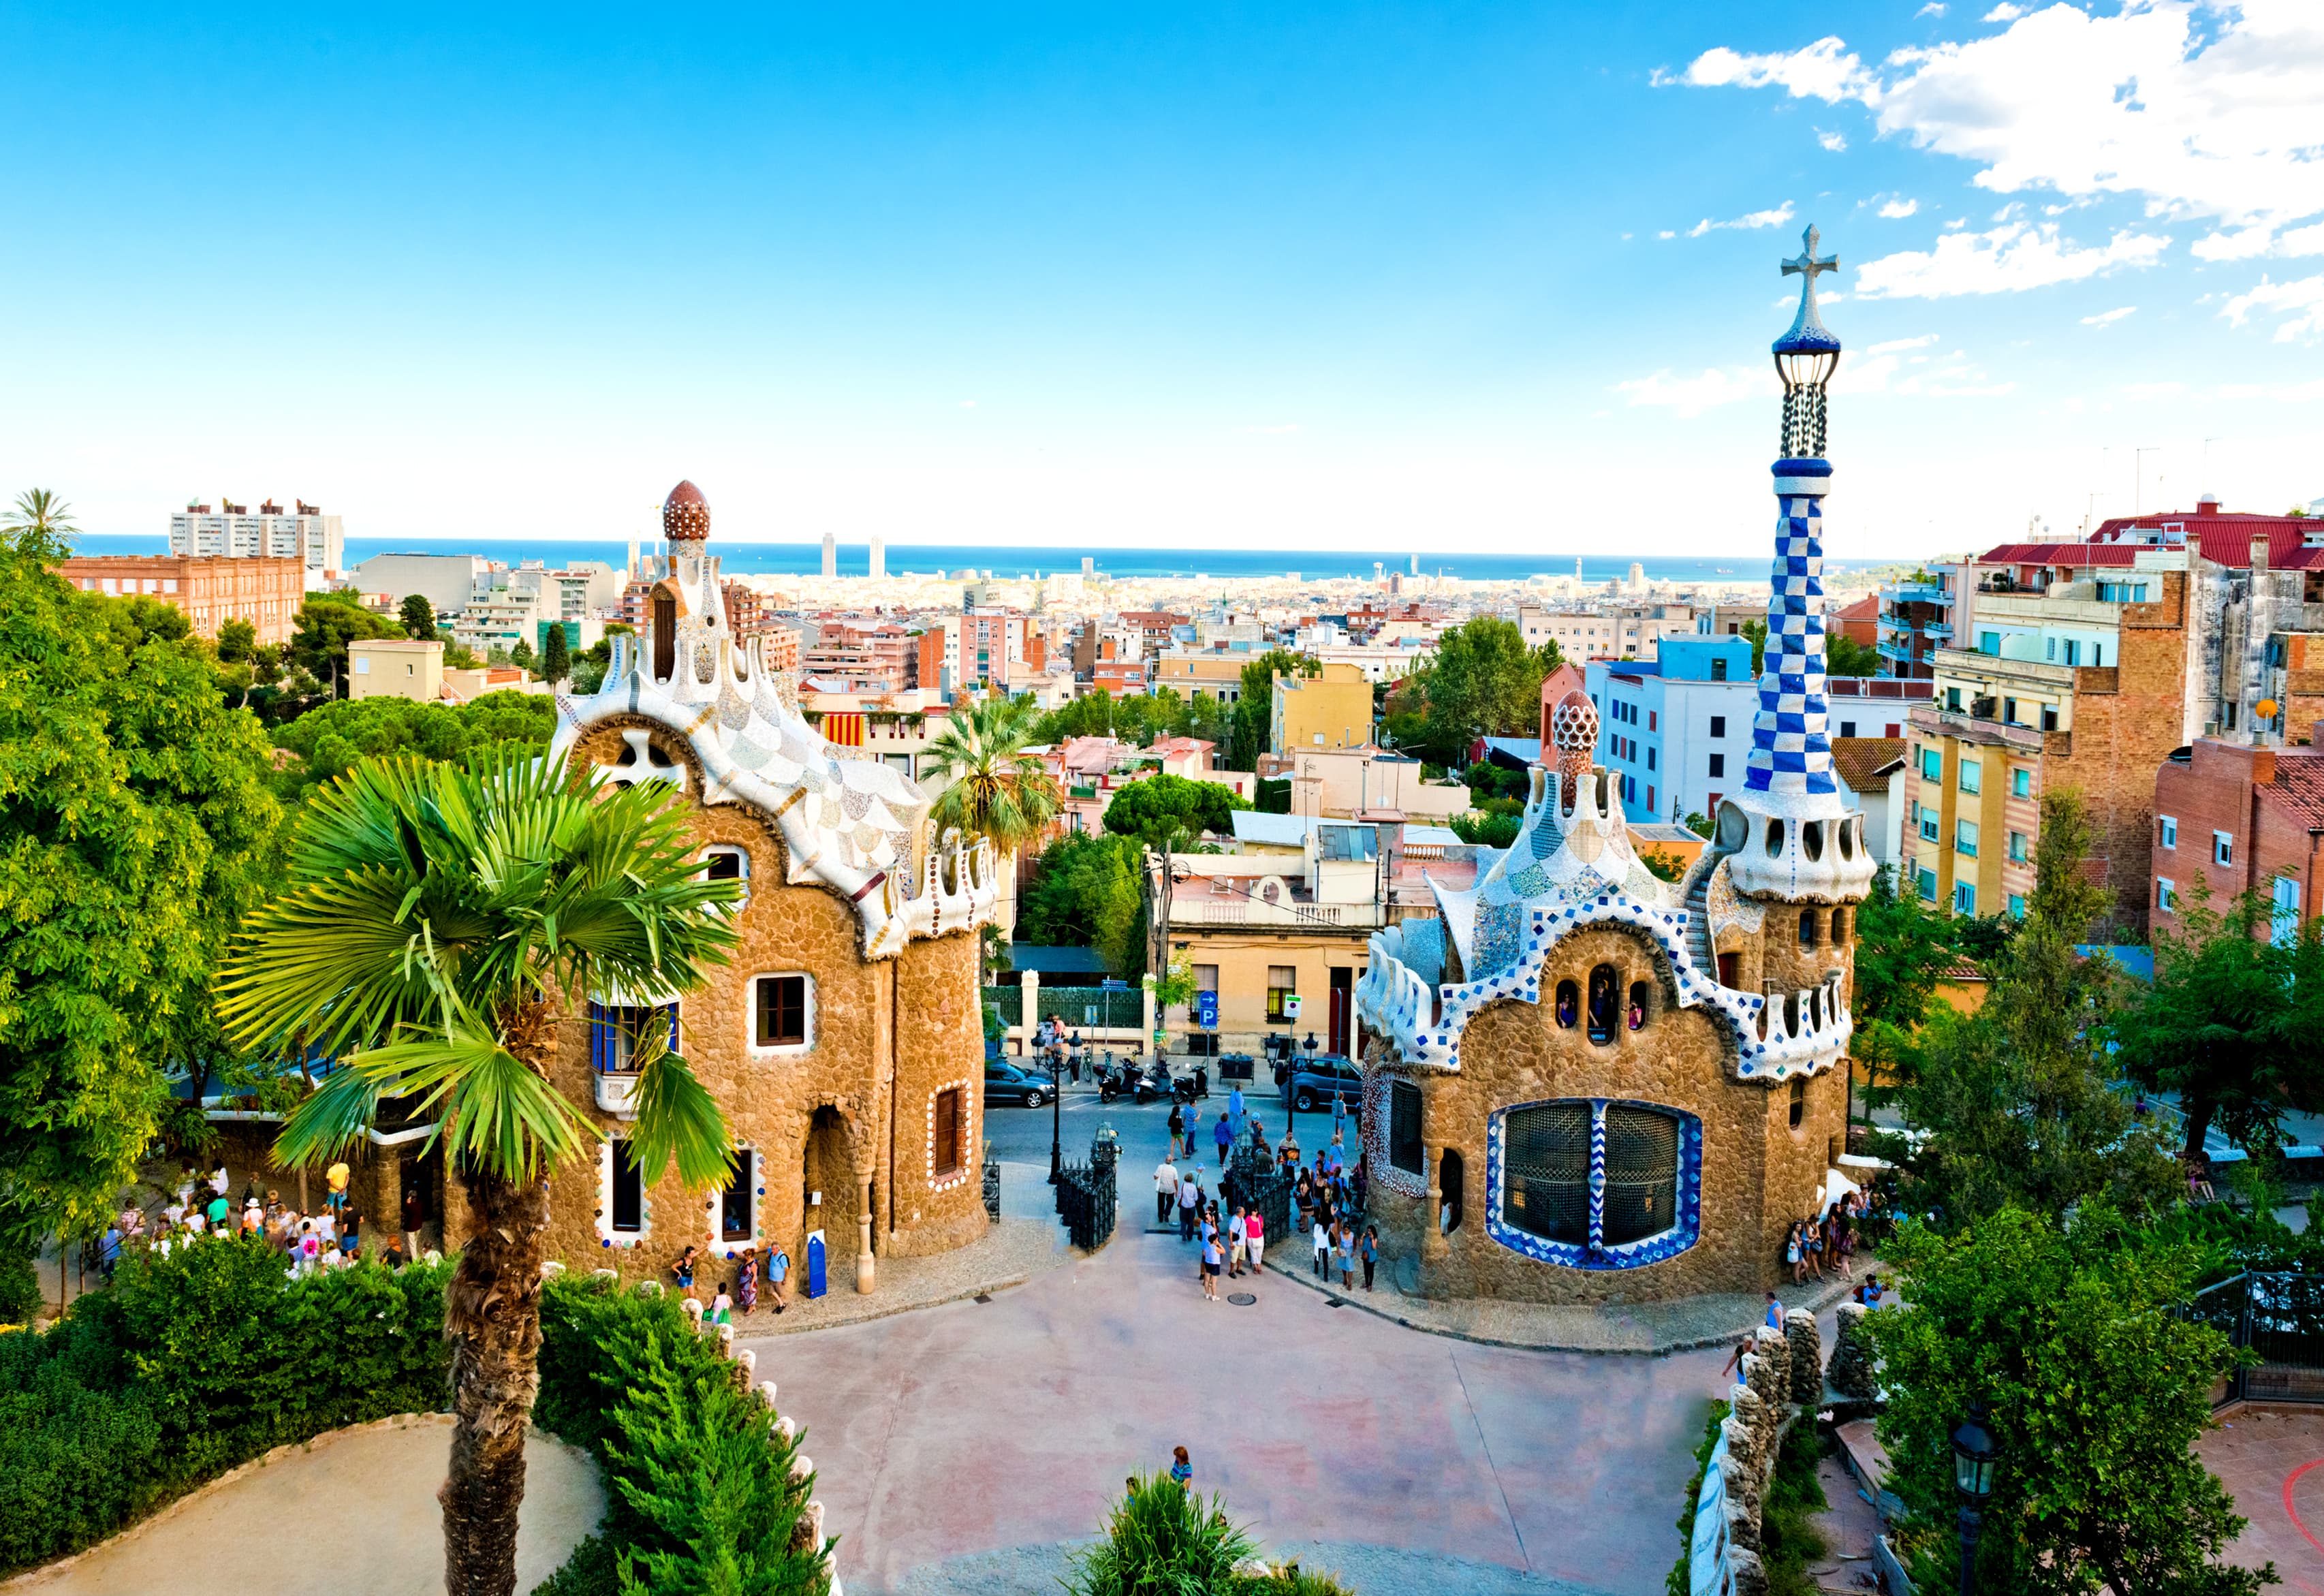 WhereToGo_2015_Spain_ParkGuell_View